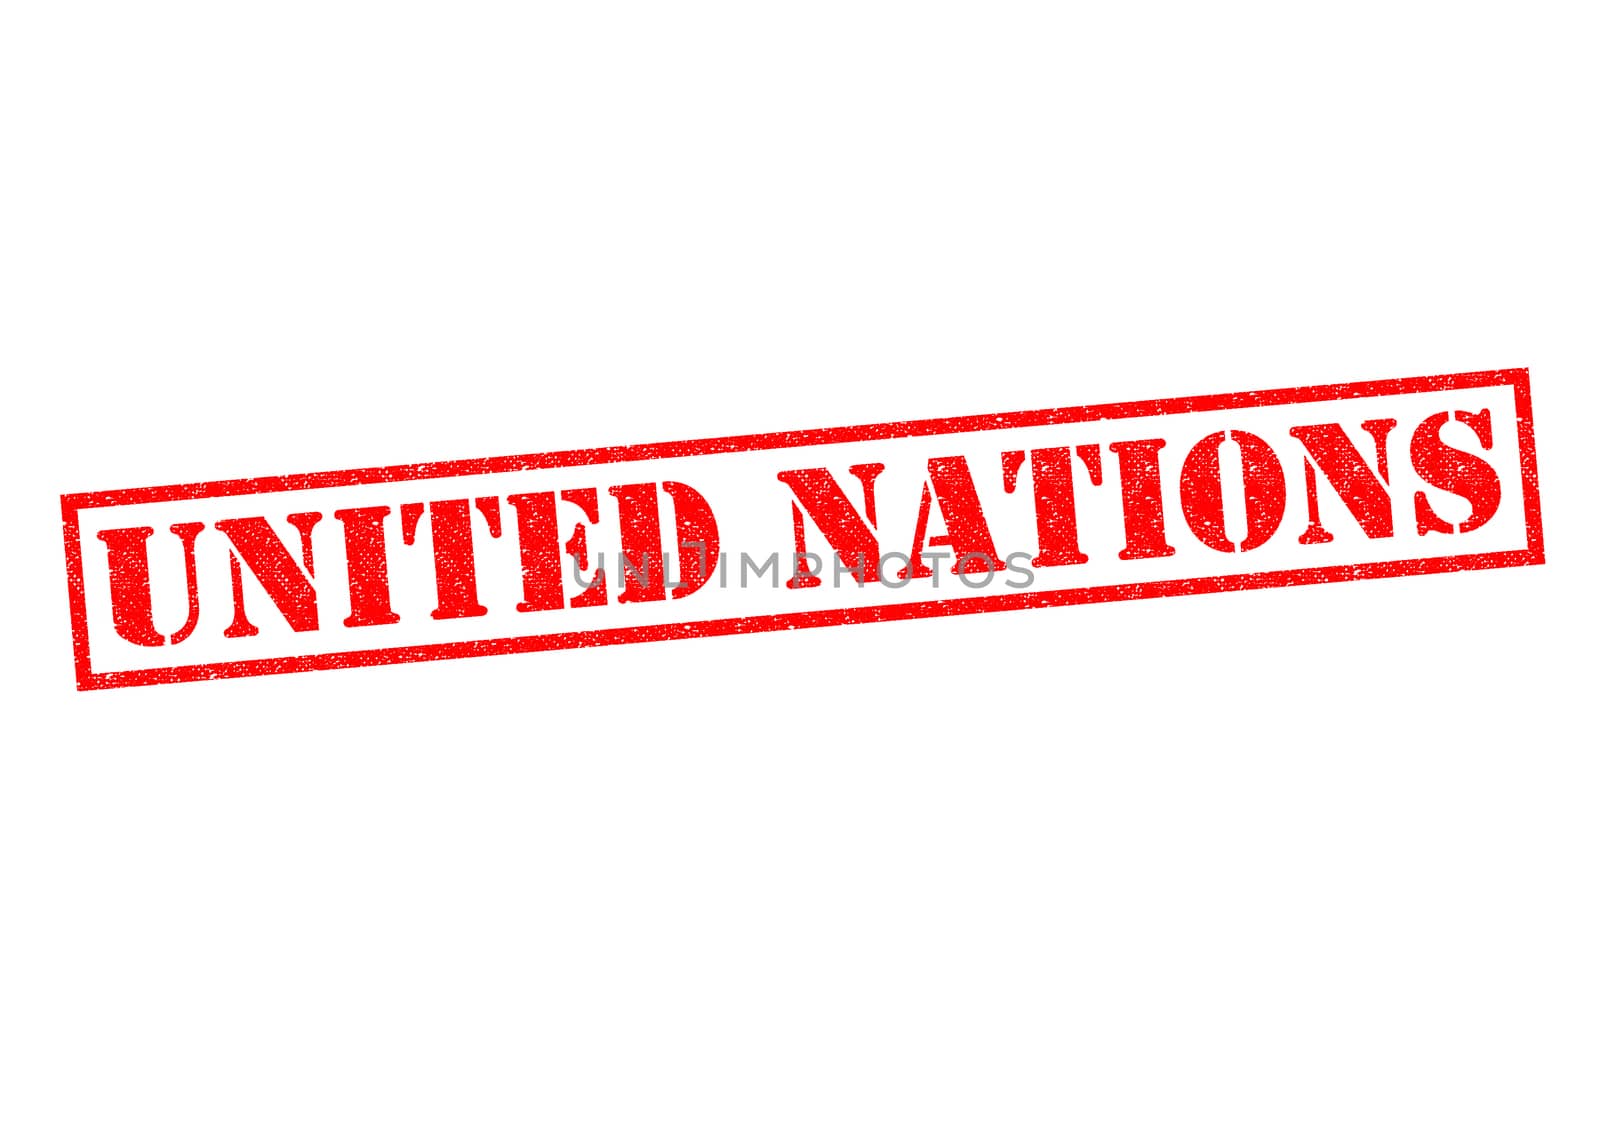 UNITED NATIONS Rubber stamp over a white background.